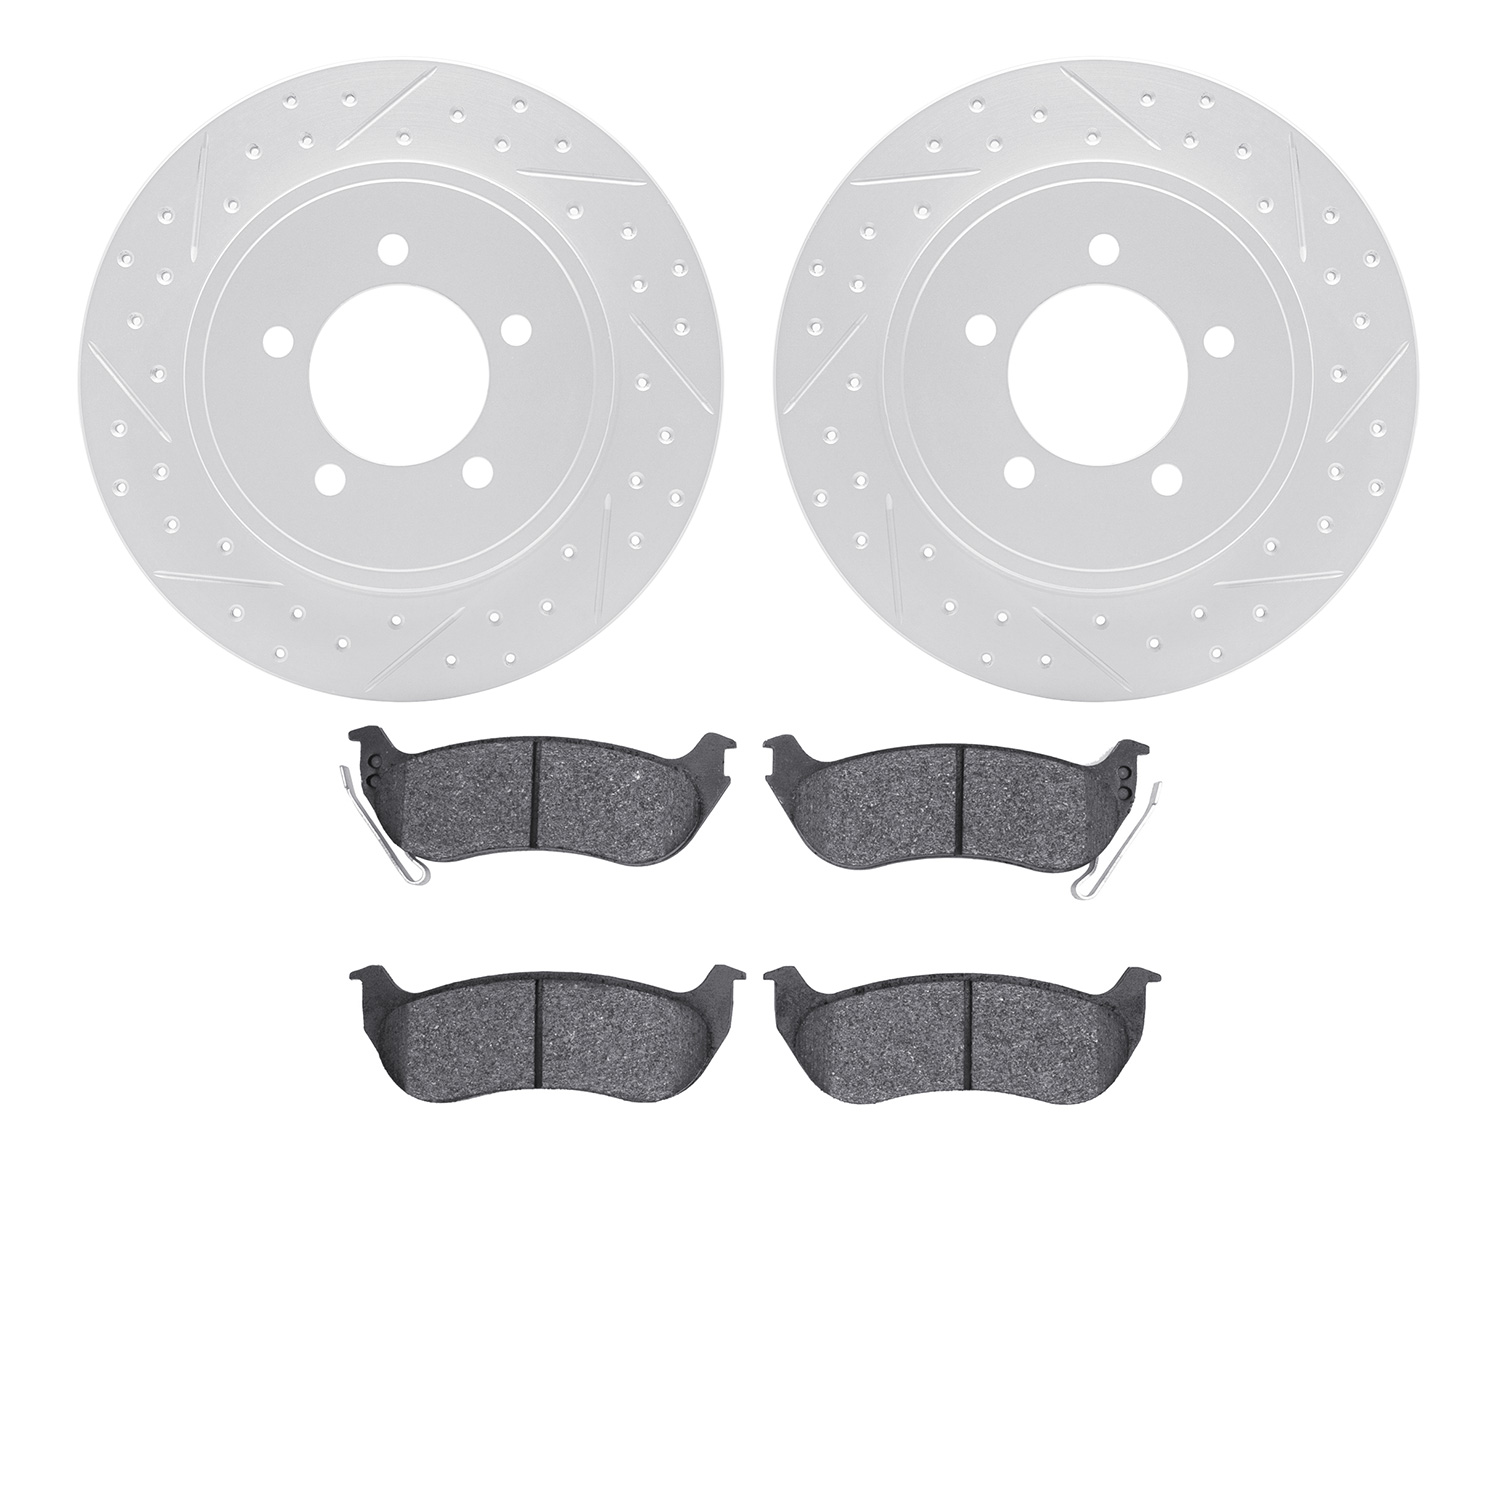 2502-54151 Geoperformance Drilled/Slotted Rotors w/5000 Advanced Brake Pads Kit, 2006-2010 Ford/Lincoln/Mercury/Mazda, Position: